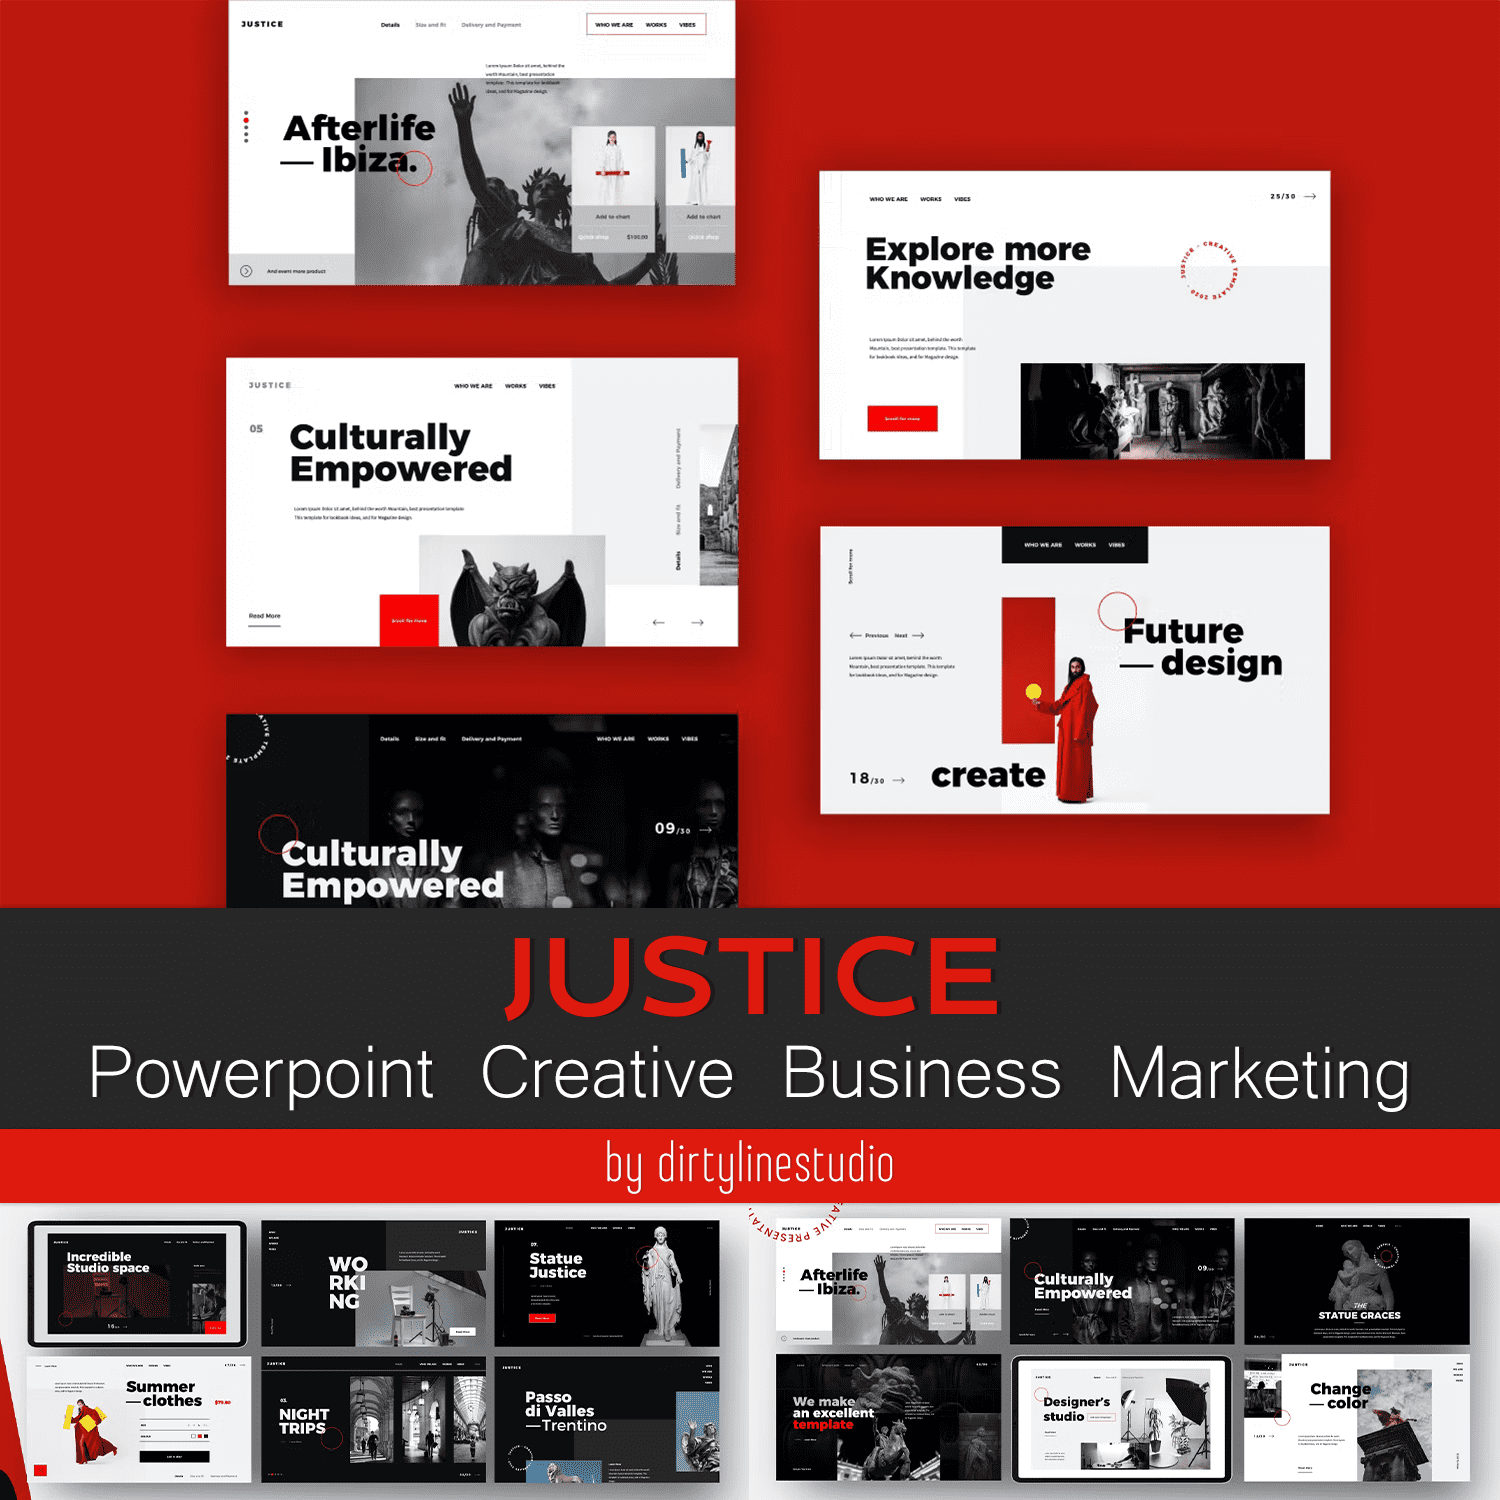 Preview justice powerpoint creative business marketing.